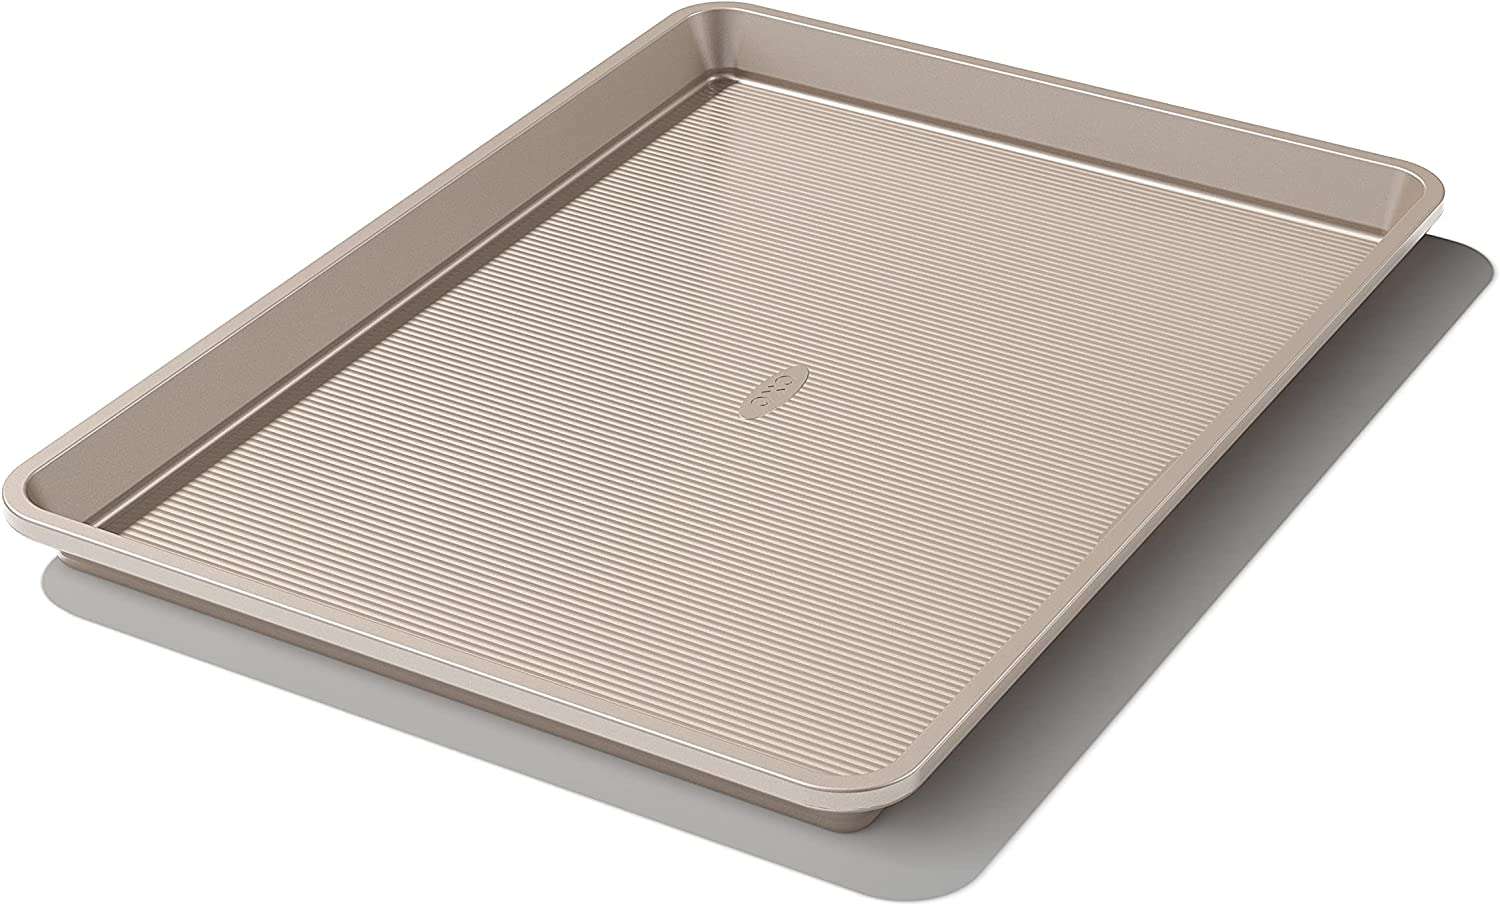 5. OXO Cookie Sheet